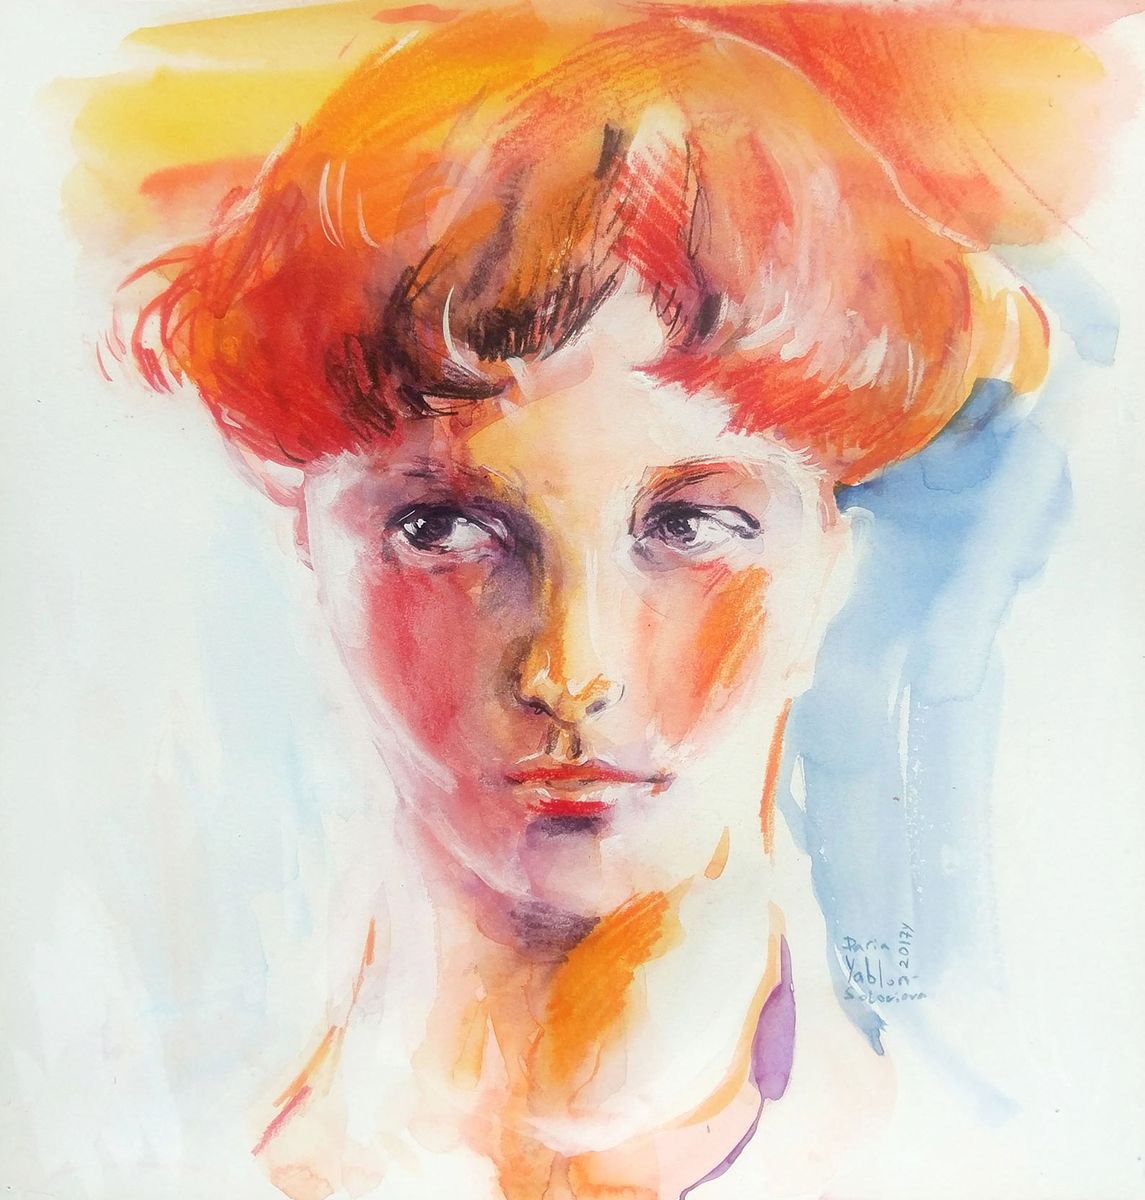 Teenagers. Frances the girl with red hair by Daria Yablon-Soloviova